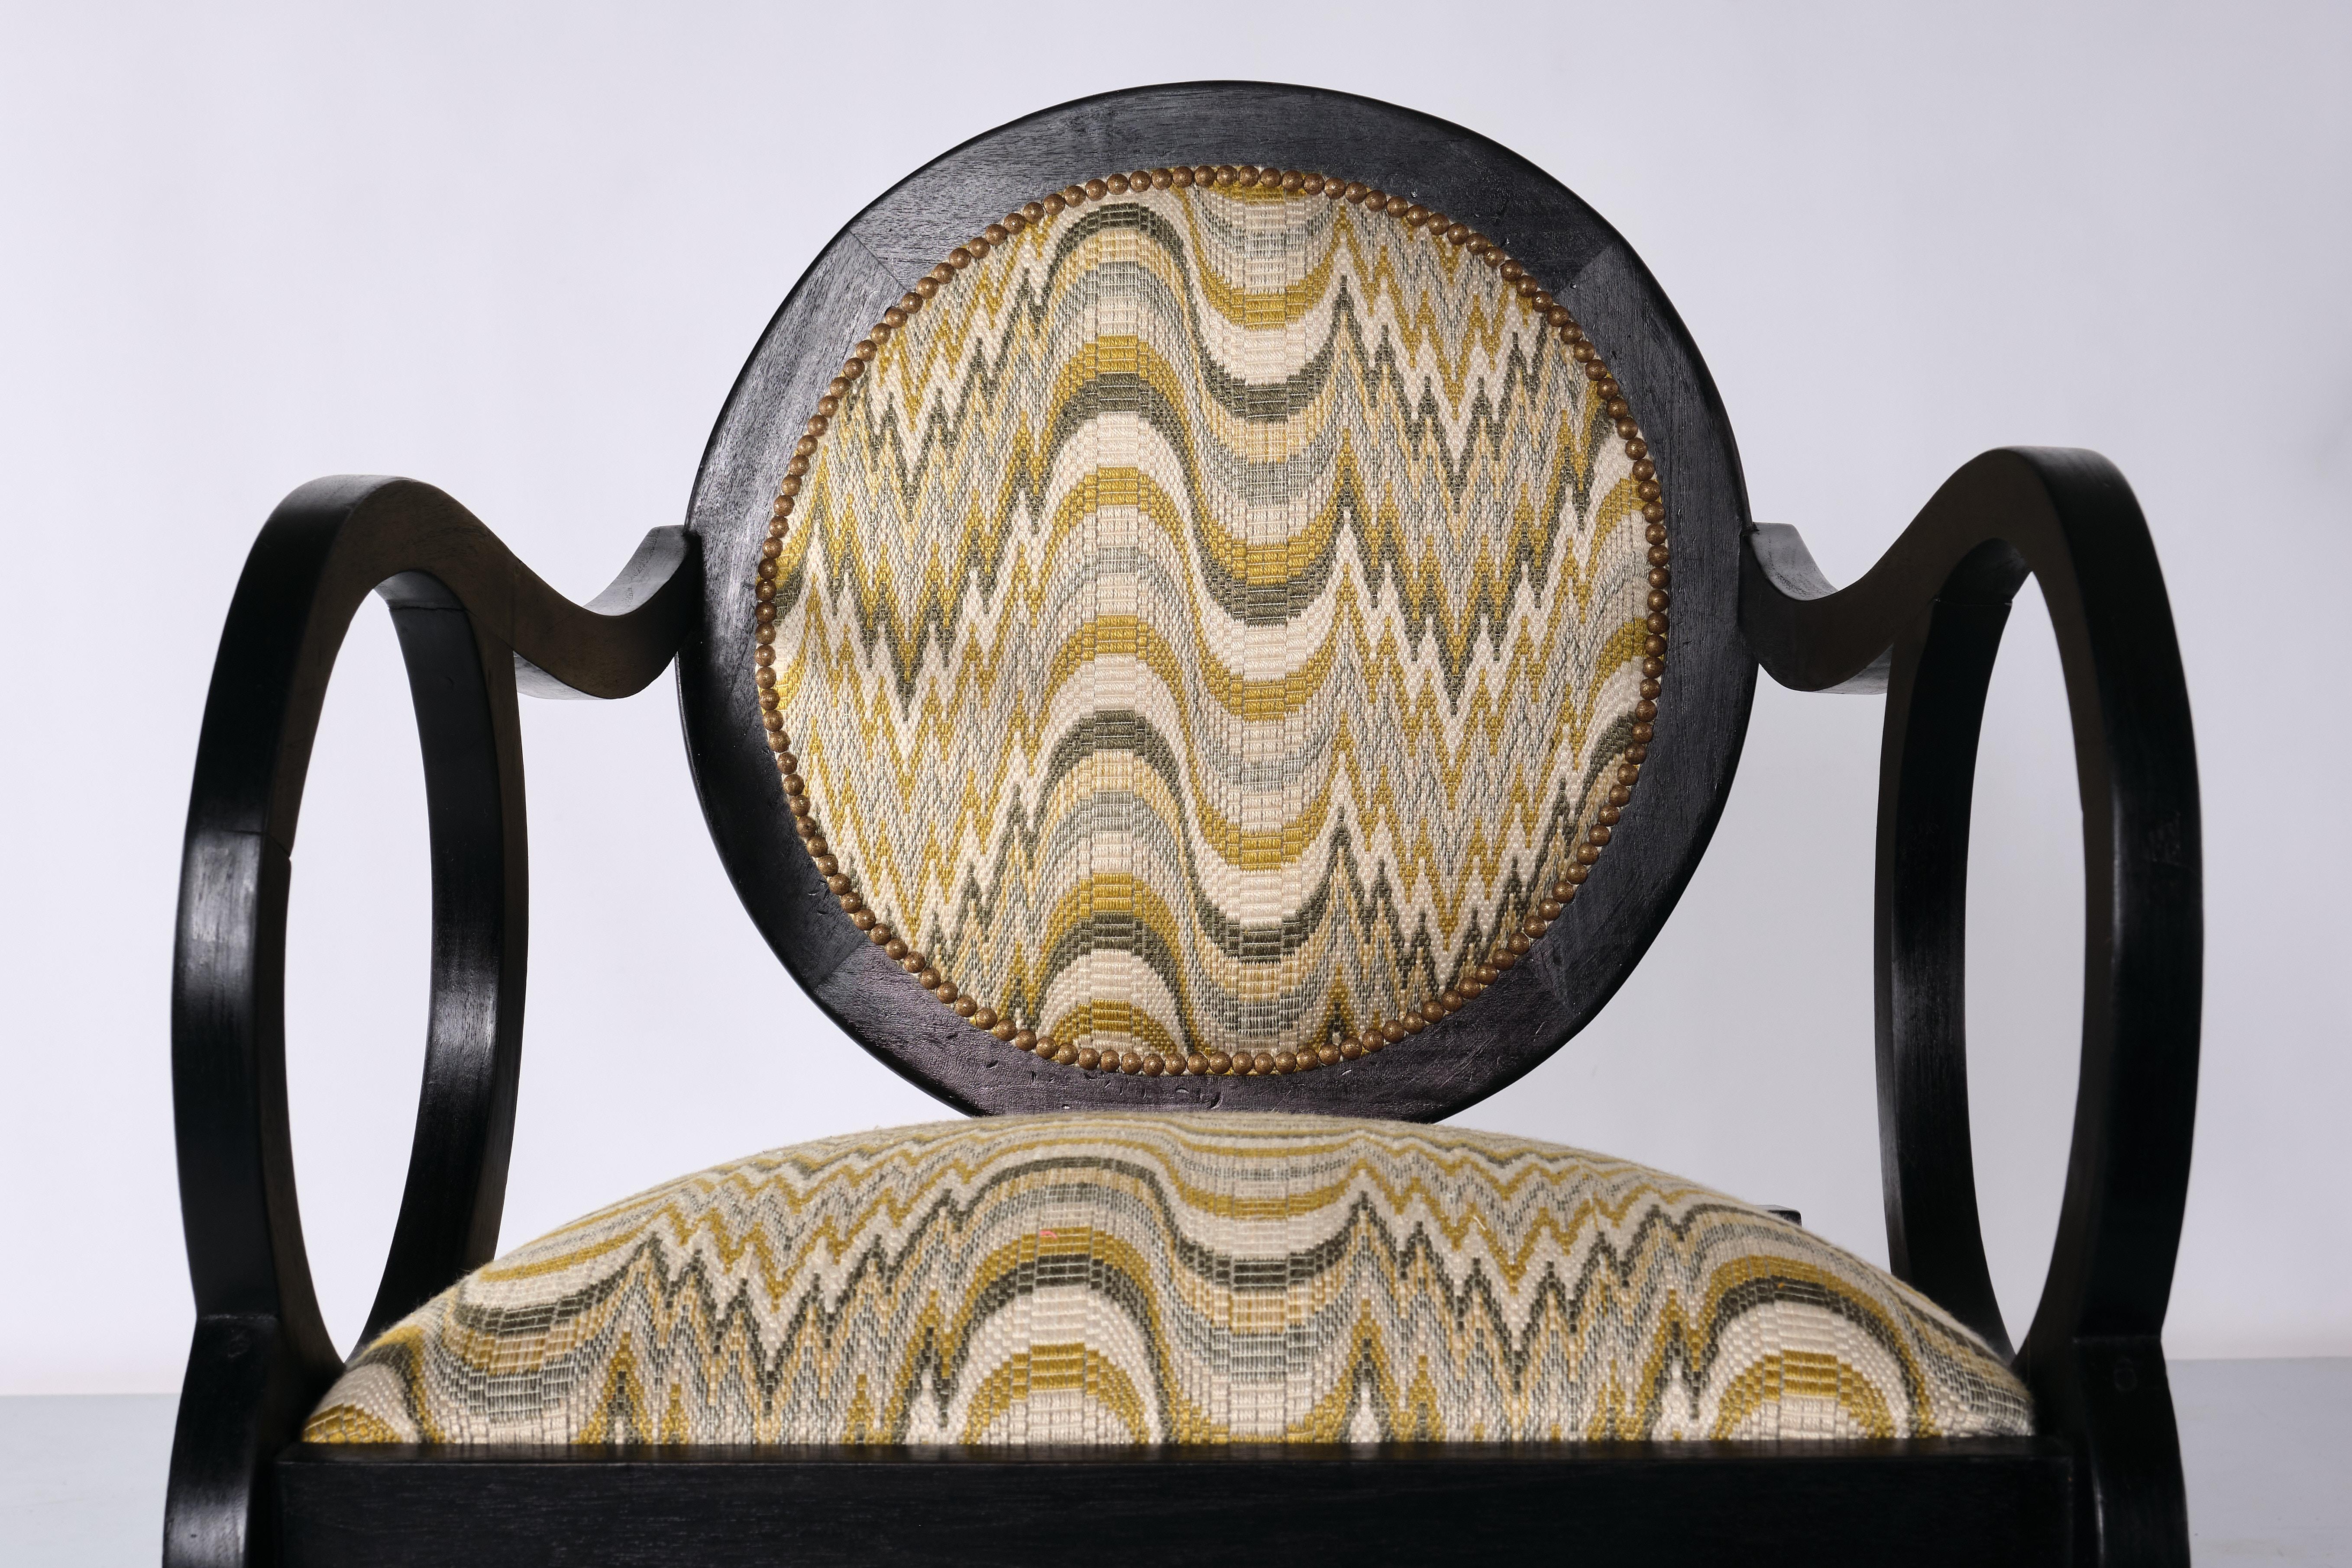 Mid-20th Century Pair of Lajos Kozma Attributed Armchairs in Oak and Dedar Jacquard, Late 1940s For Sale